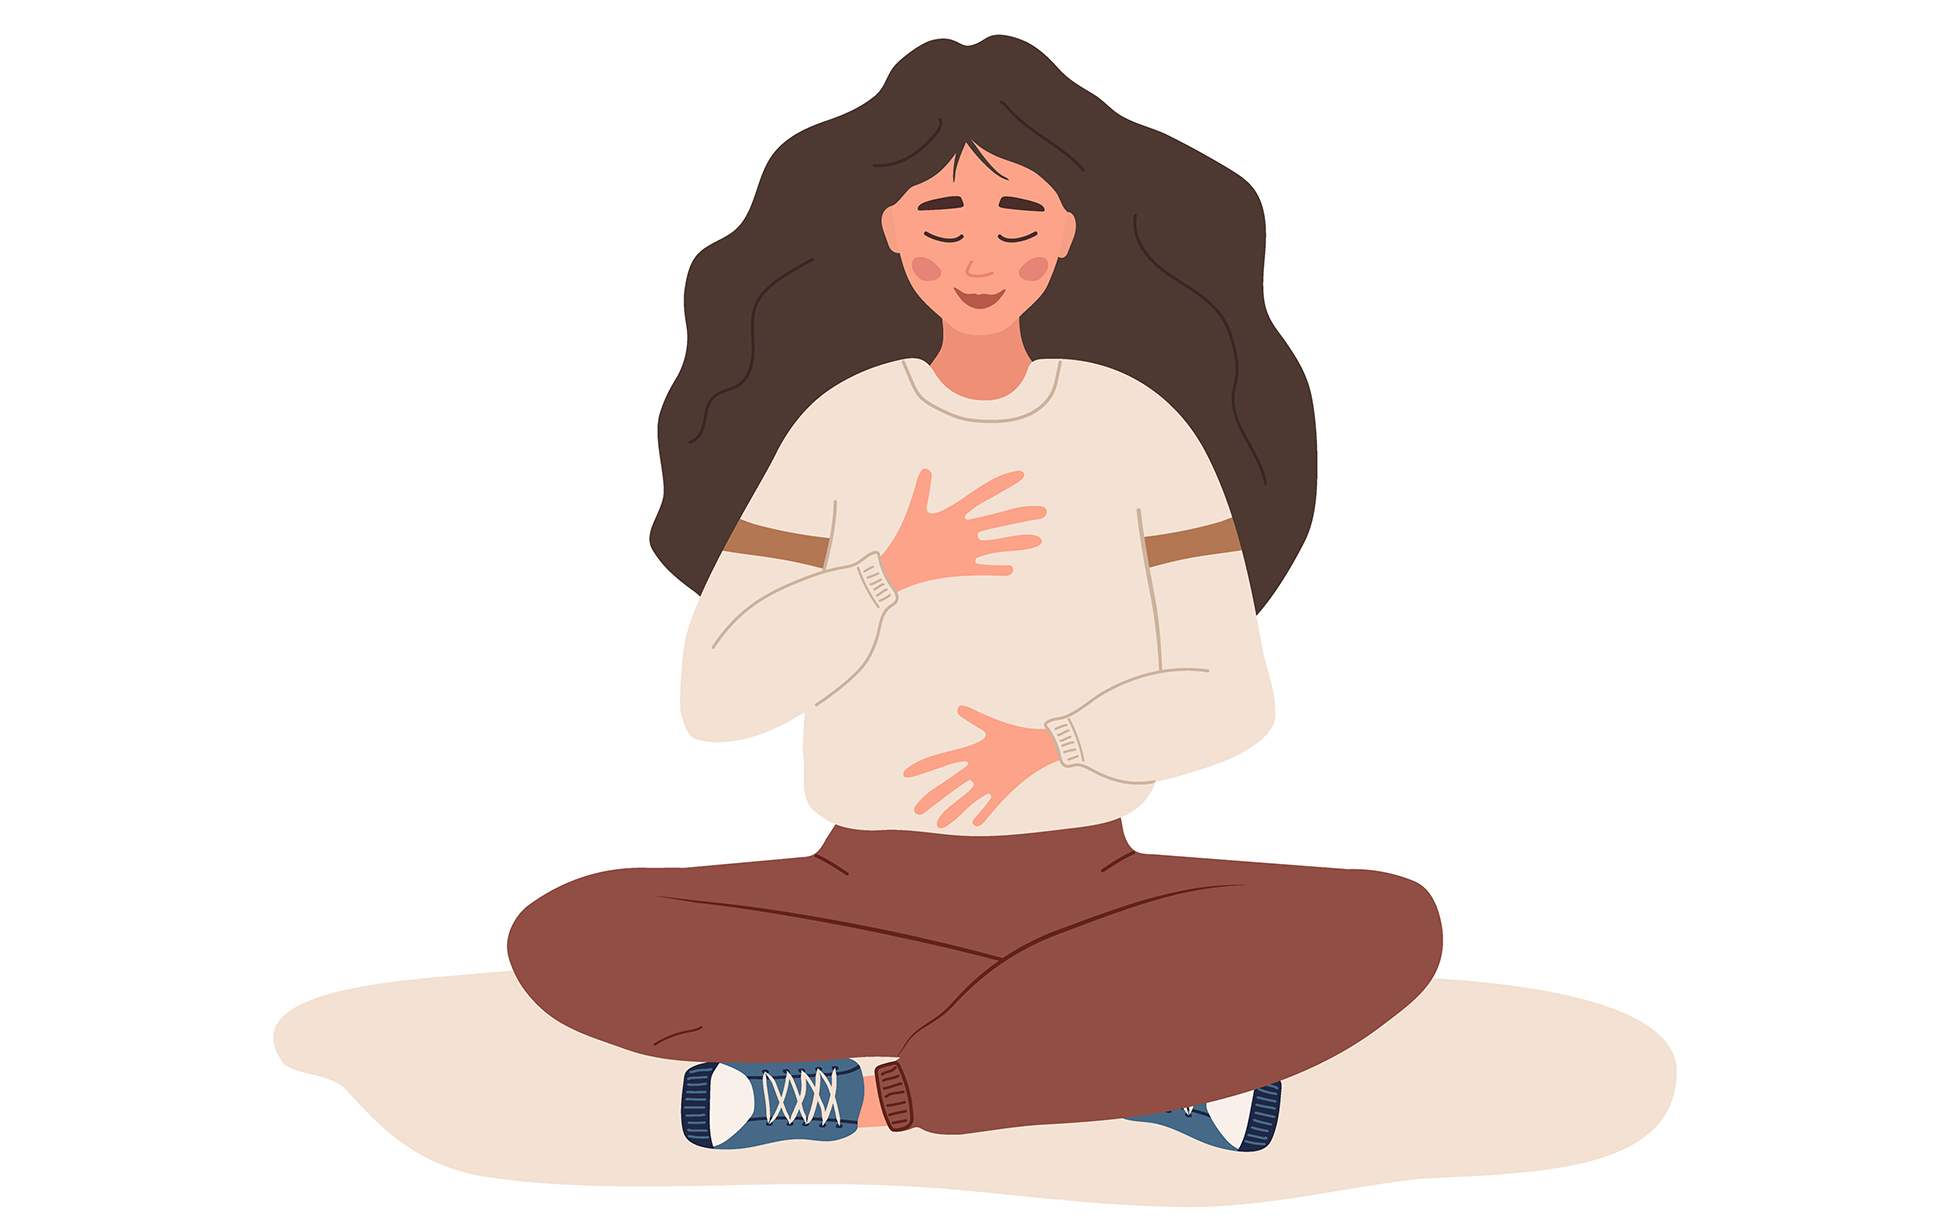 Illustration of a woman with long brown hair sitting cross-legged with one hand over her heart and one hand on her belly.